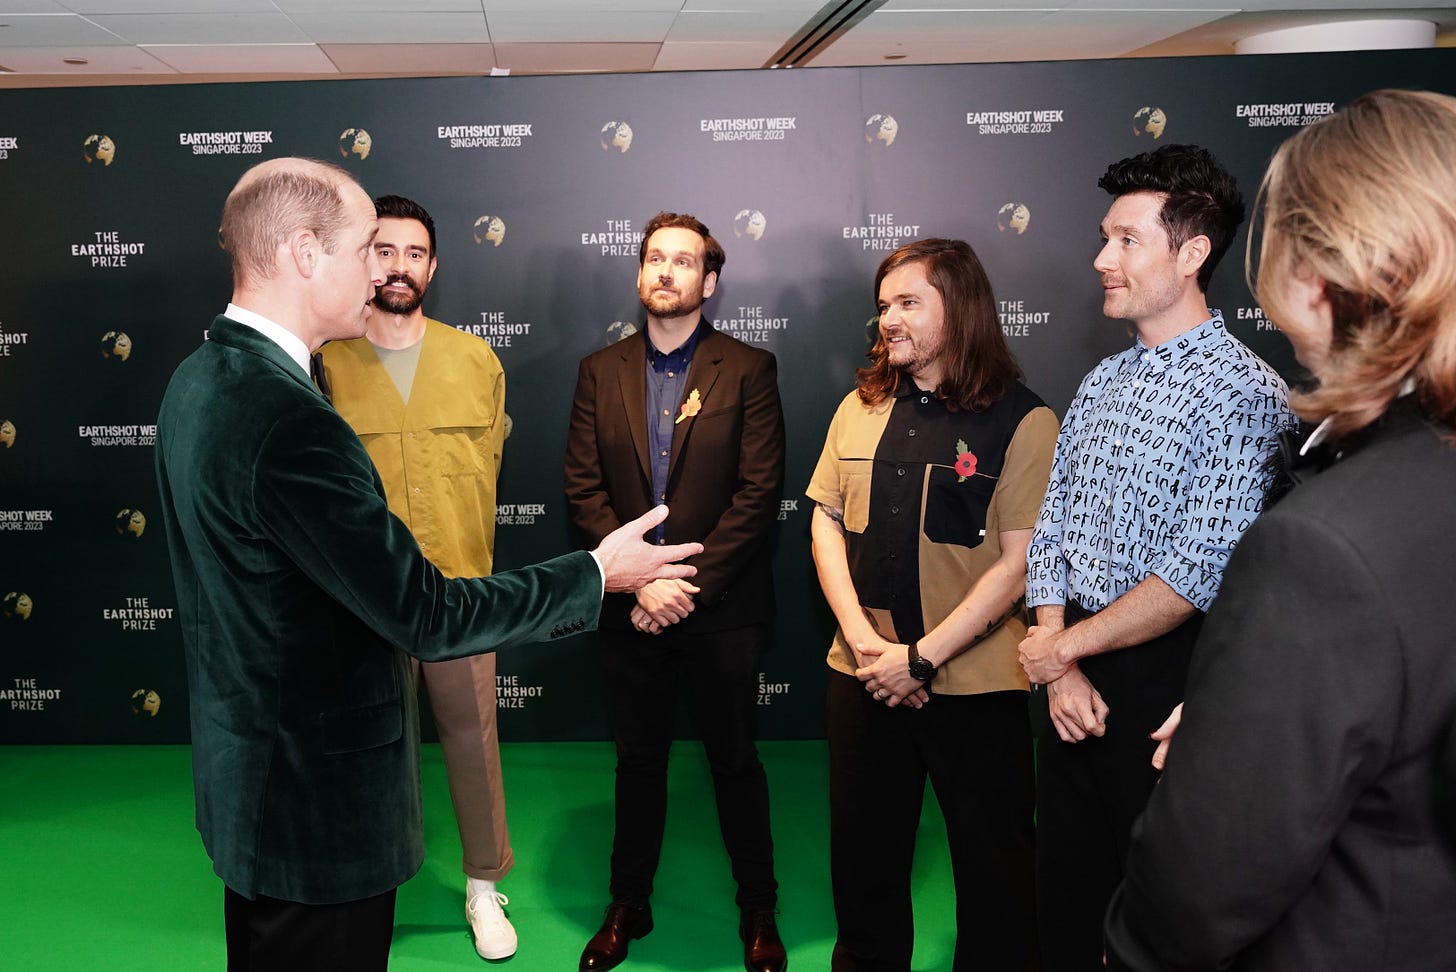 Prince William greets members of Bastille on green carpet